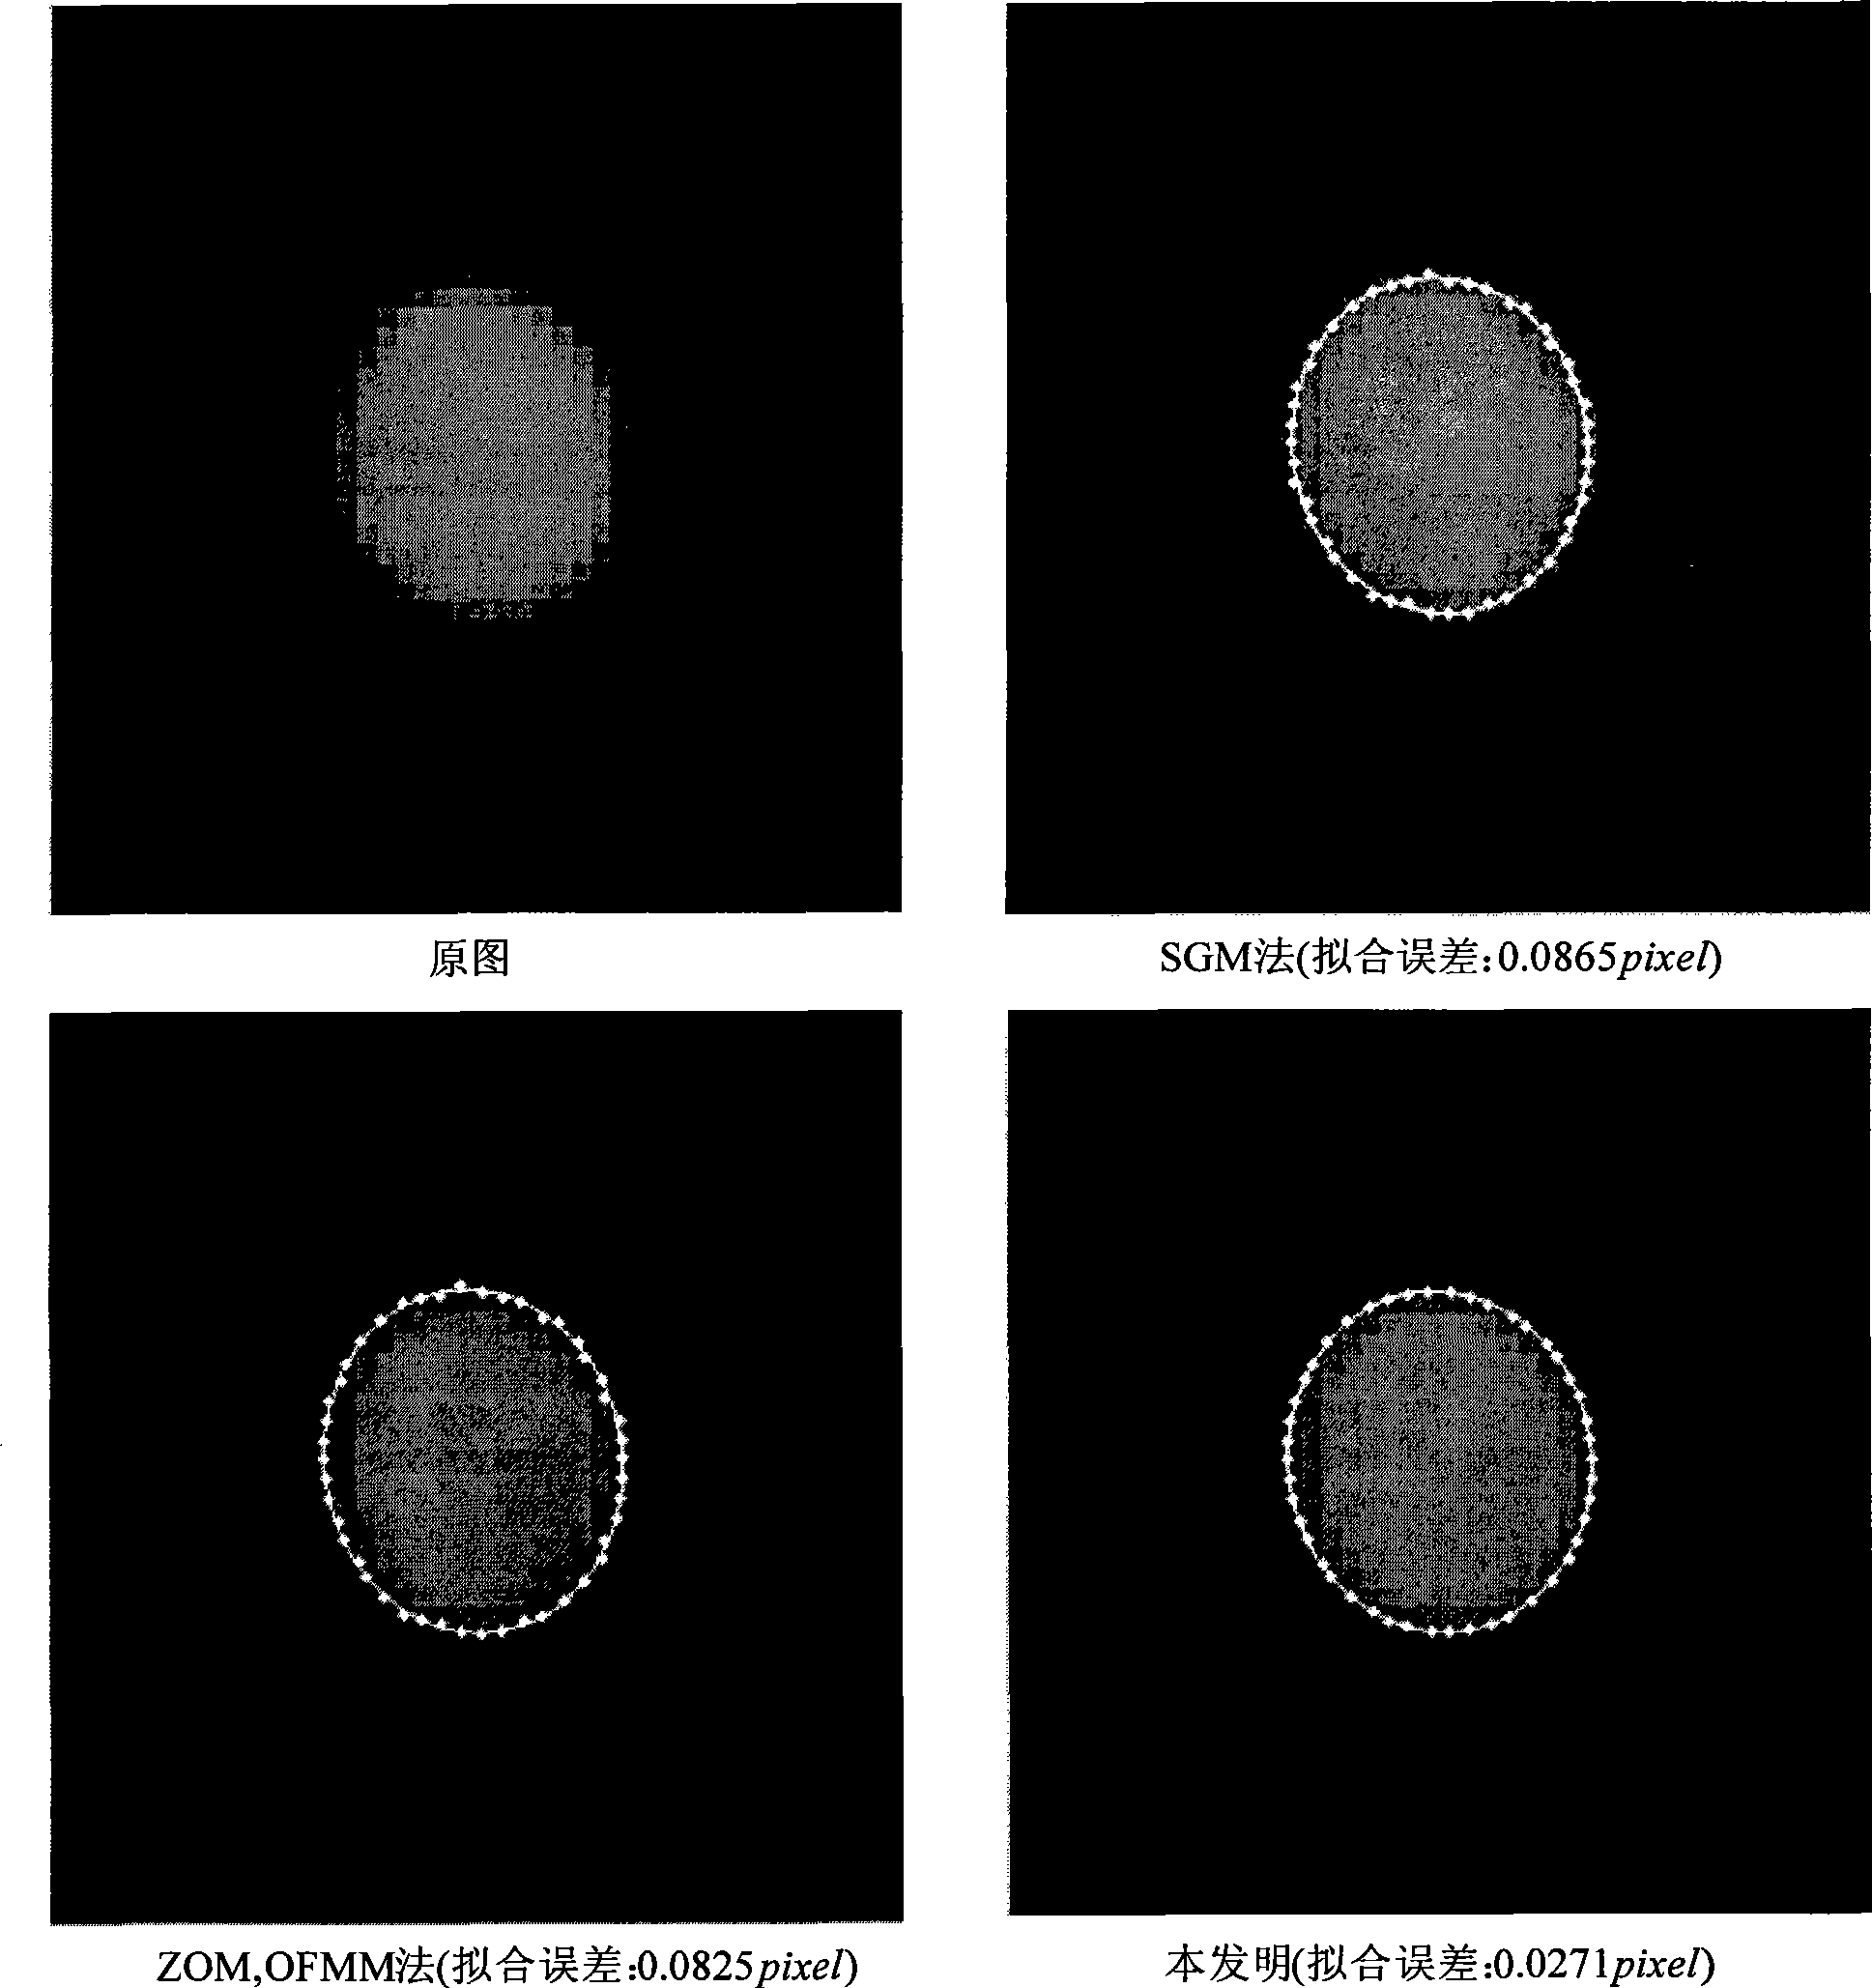 Method for orientating secondary pixel edge of oval-shaped target